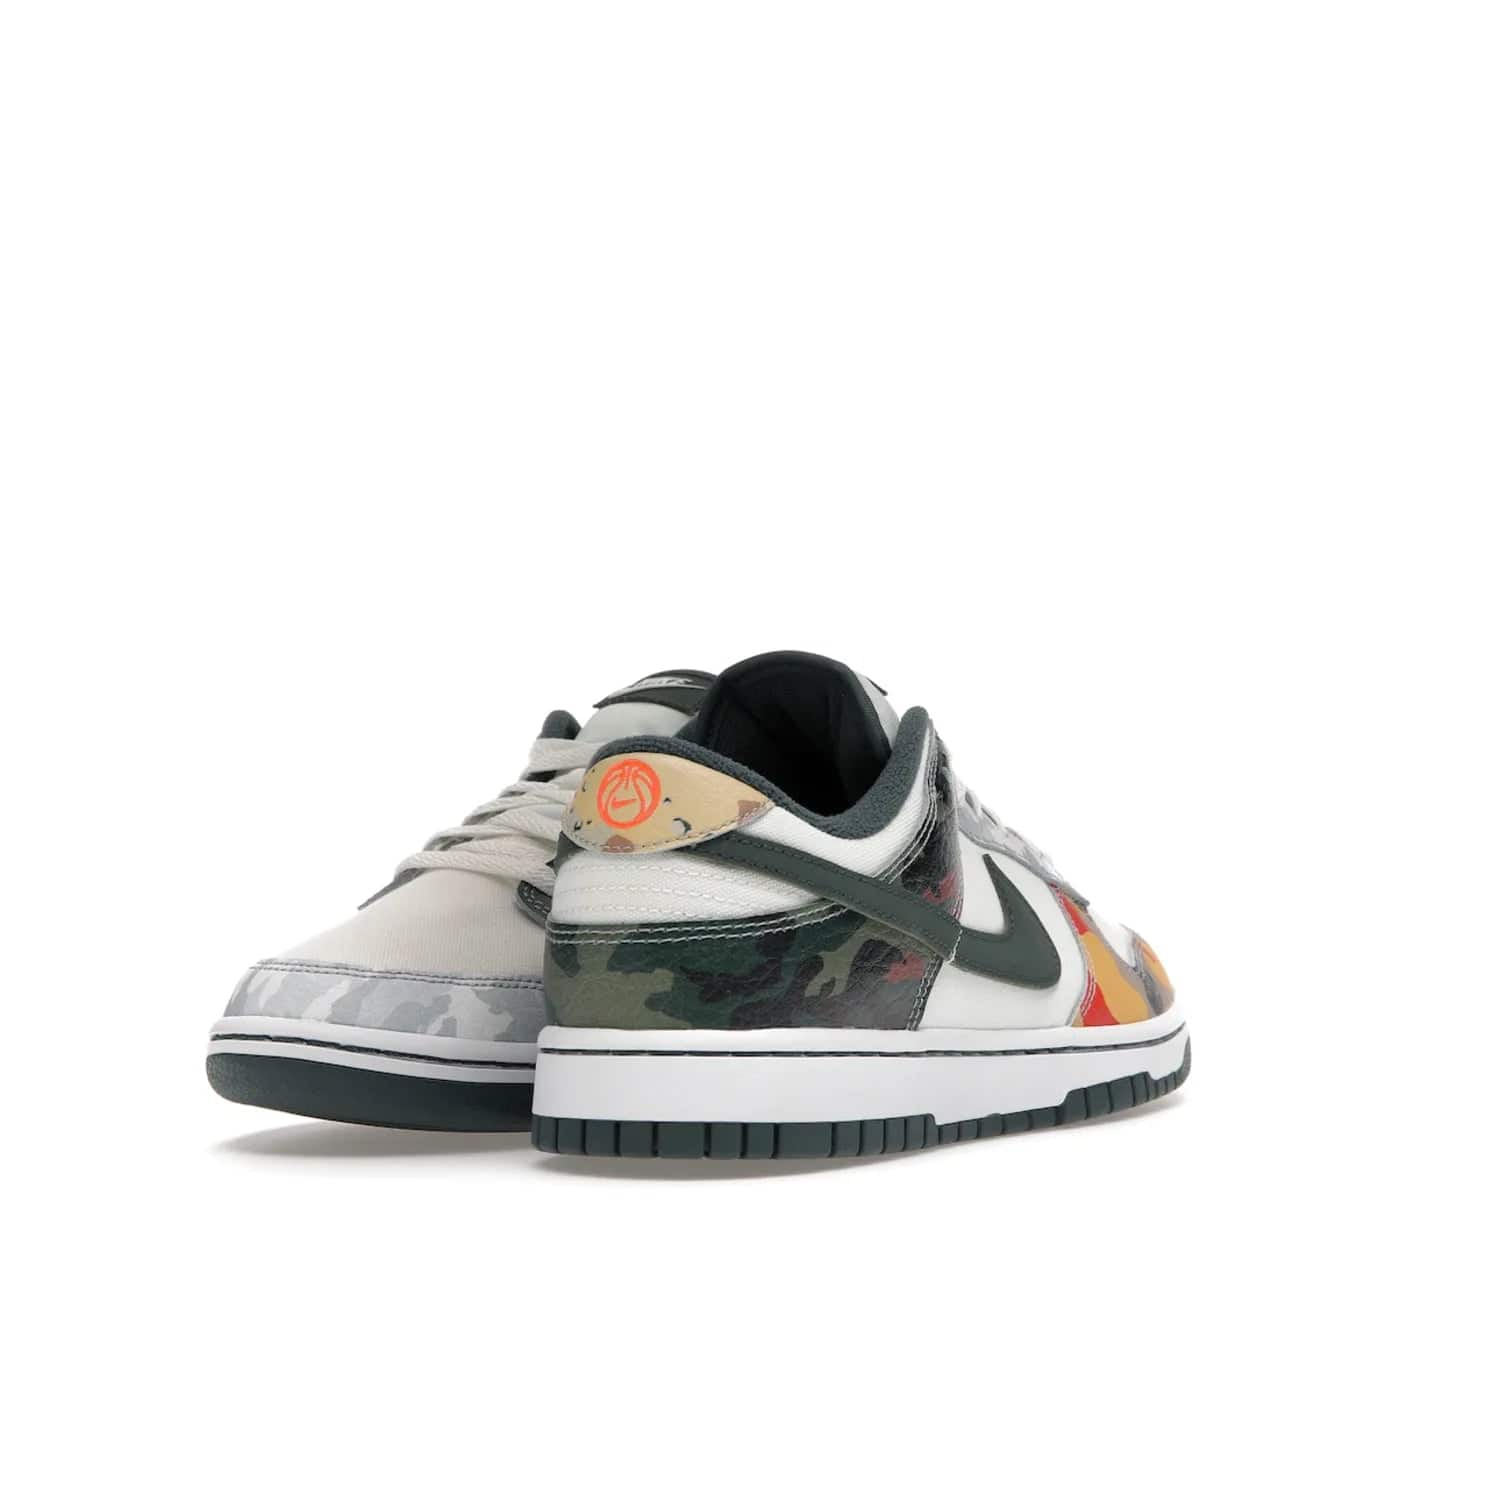 Nike Dunk Low SE Sail Multi-Camo - Image 31 - Only at www.BallersClubKickz.com - Classic design meets statement style in the Nike Dunk Low SE Sail Multi-Camo. White leather base with multi-color camo overlays, vibrant Nike Swooshes, and orange Nike embroidery. Get yours August 2021.